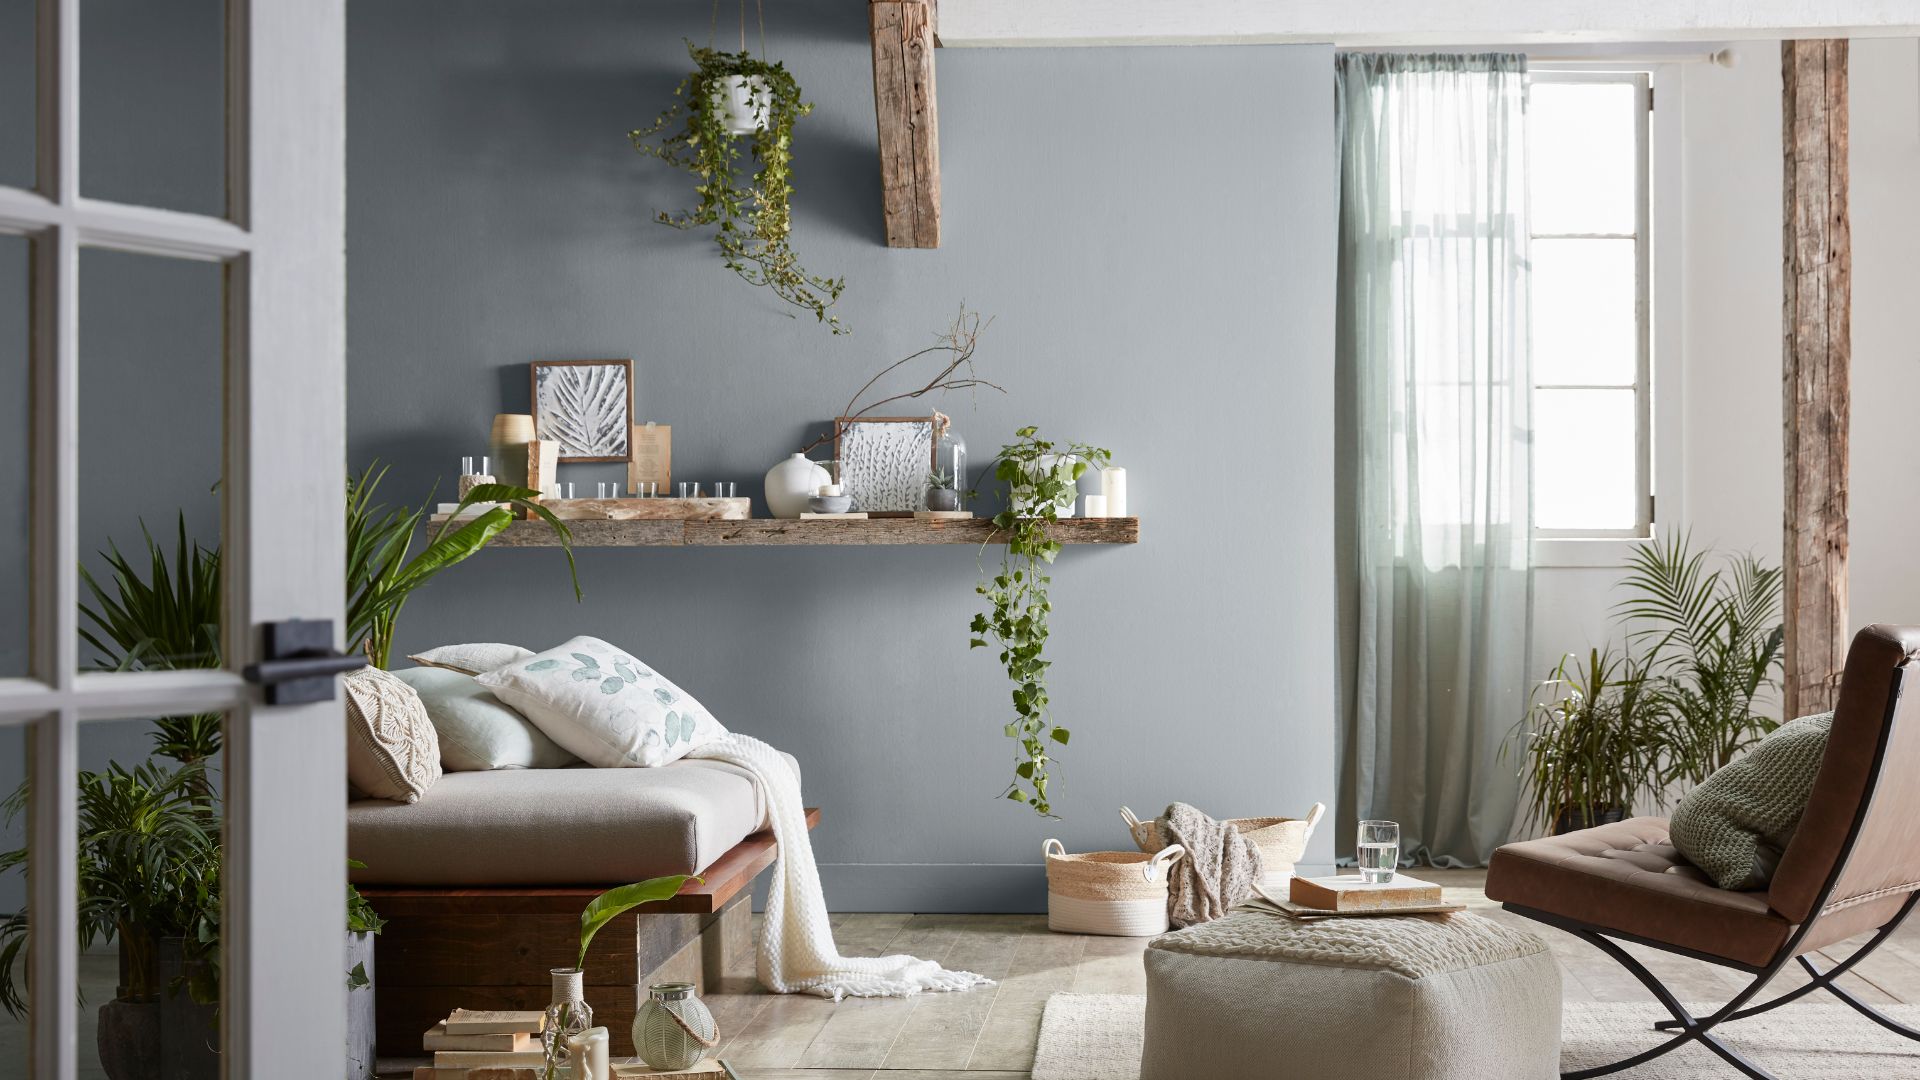 Grey themed living room decorated with plants and wooden decor